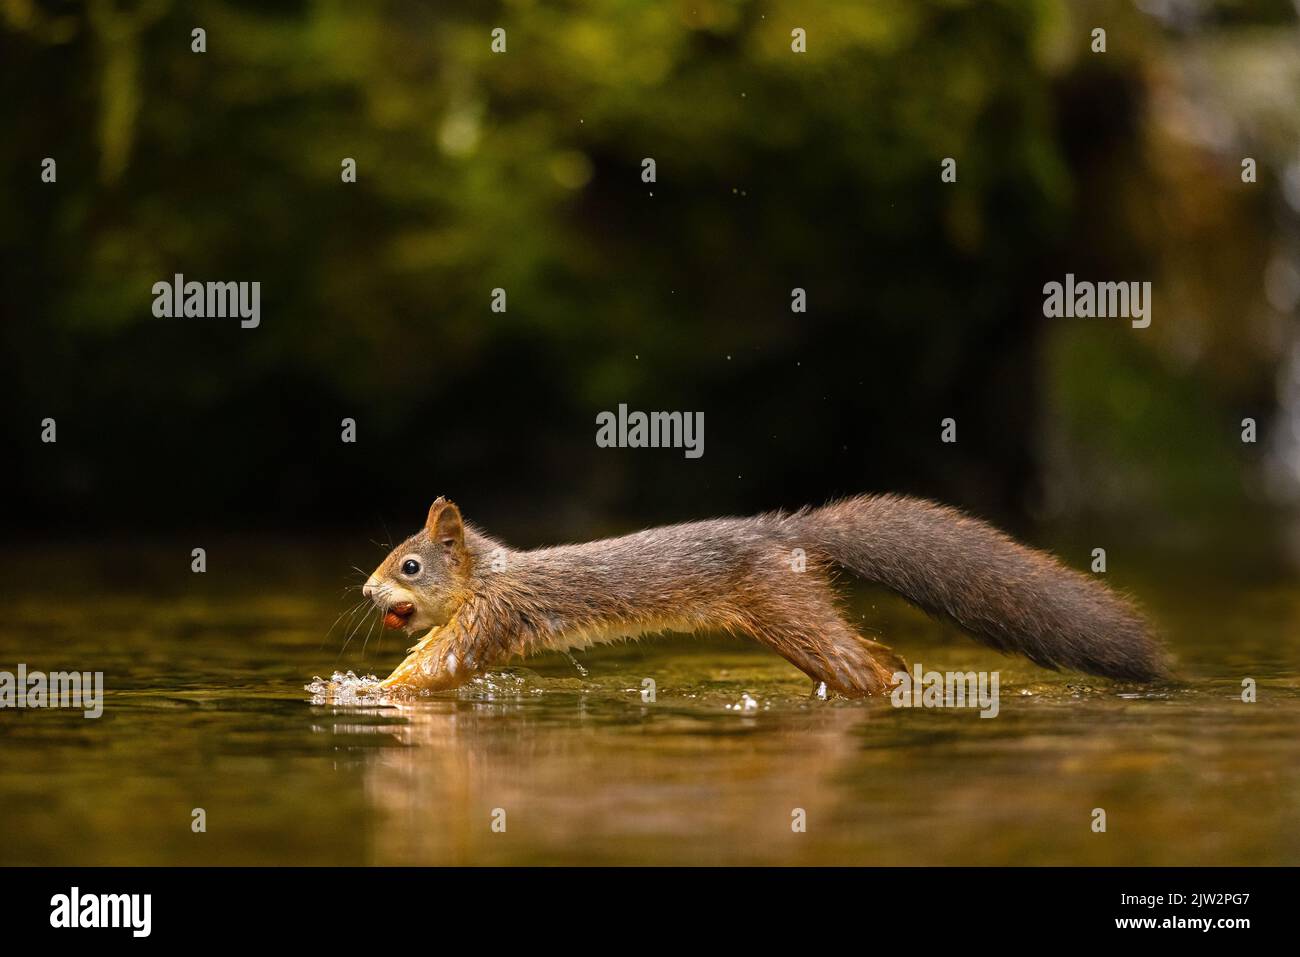 Wild red squirrel jumping in the water with a nut in mouth Stock Photo